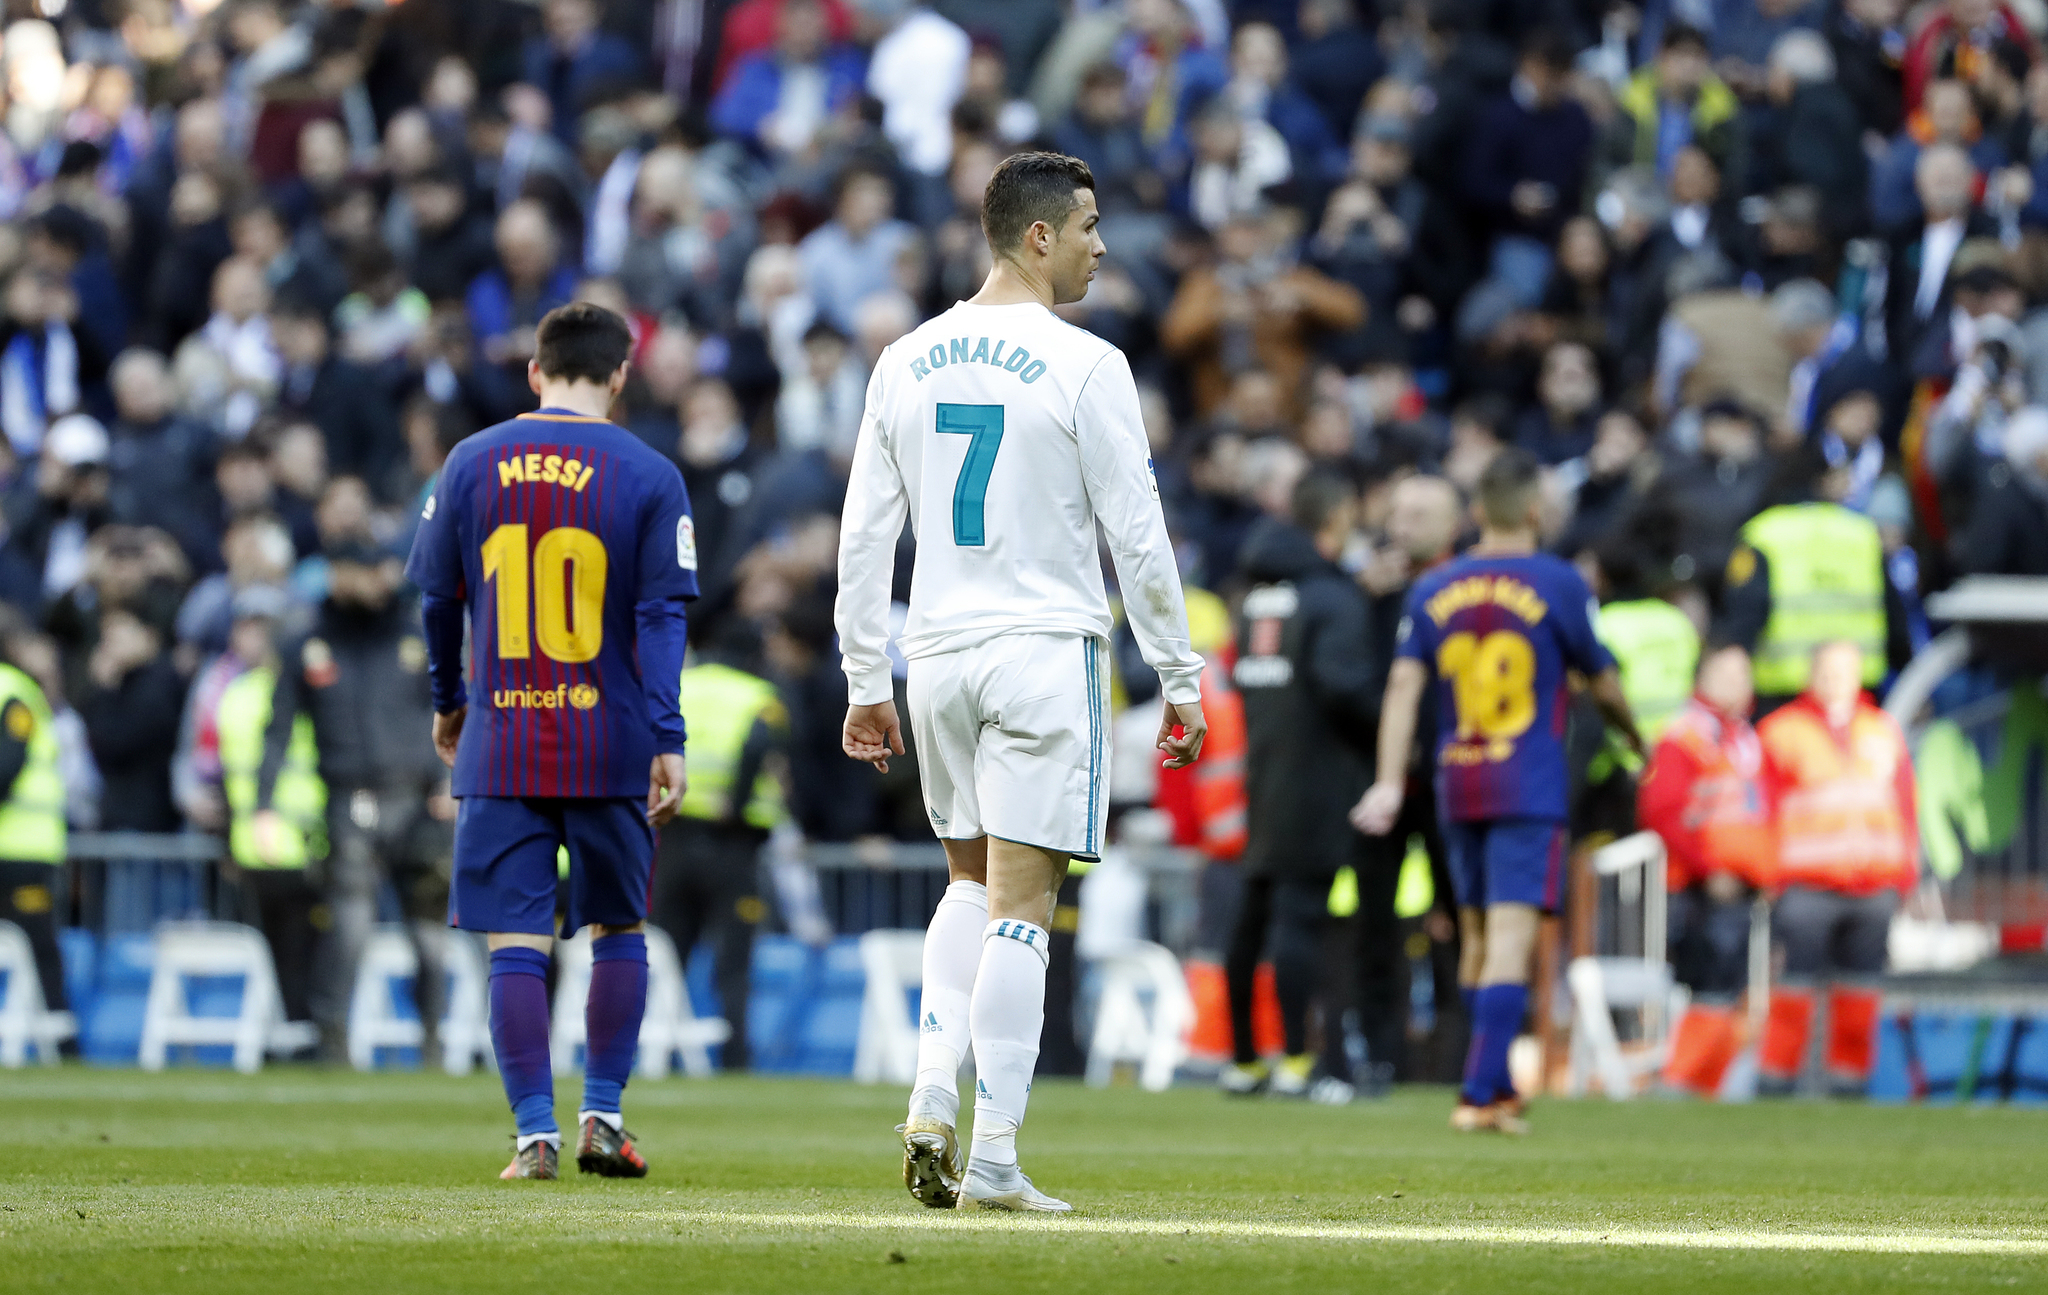 Cristiano Ronaldo and Messi, in a match between Real Madrid and Barcelona.